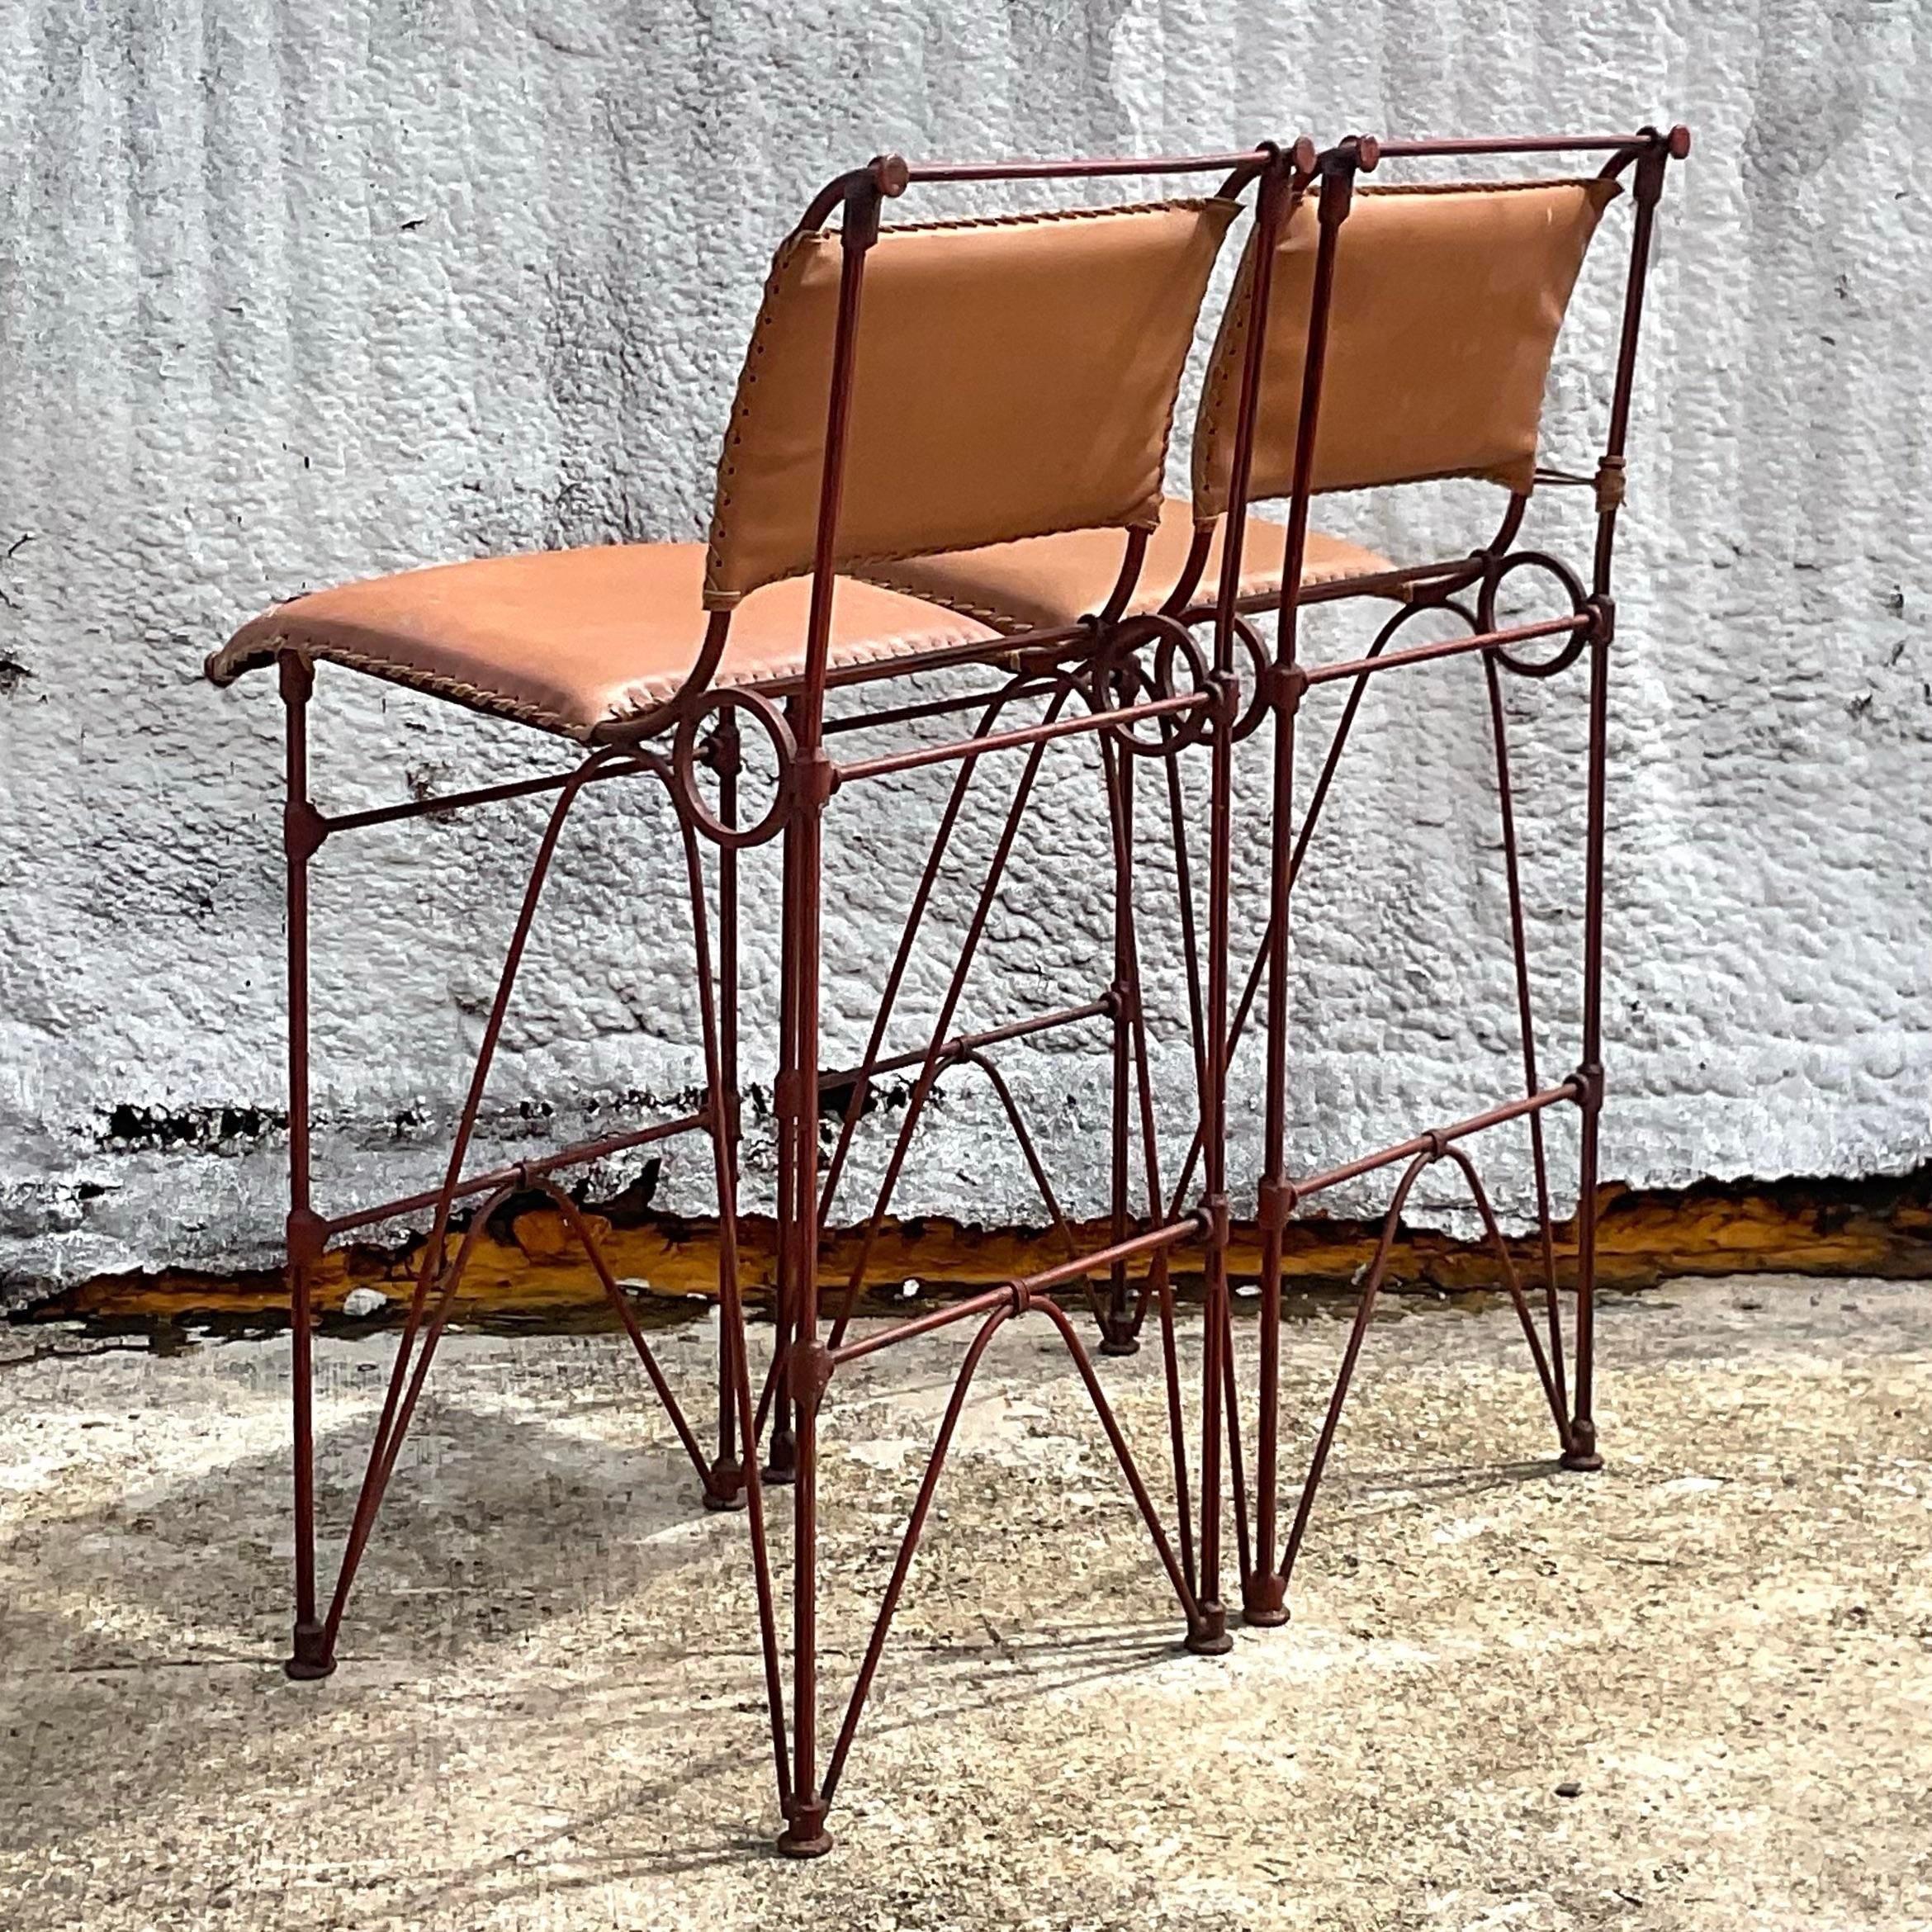 A fabulous pair of vintage bar stool done in the manner of Ilana Goor. The bar stools are in a brutalist style with bent rebar and leather seating. Acquired at a Palm Beach estate.